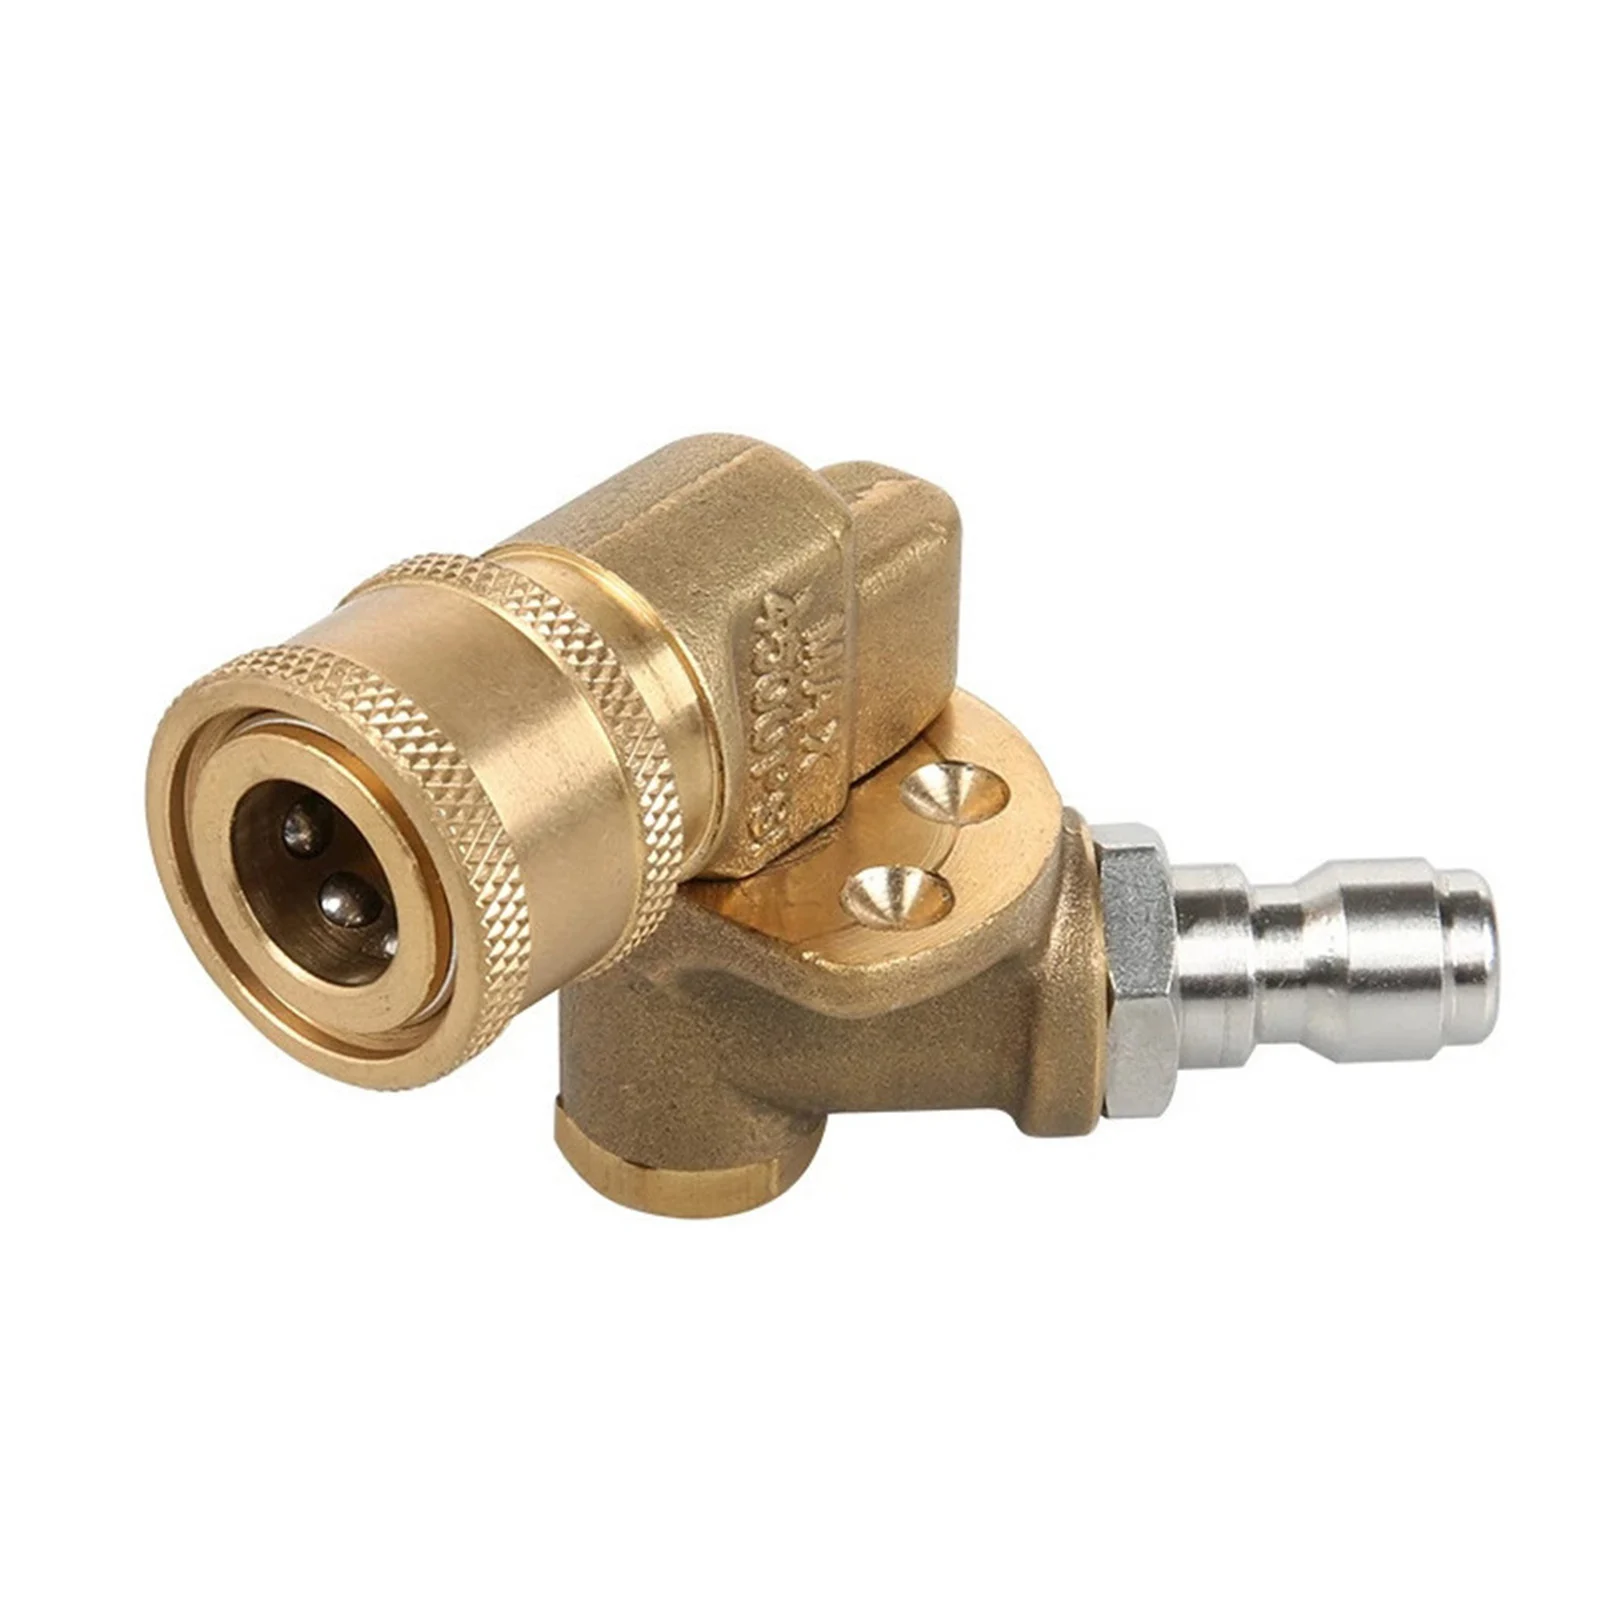 

4500PSI Dead Angle Accessories Quick Connecting Cleaning Spray Nozzle Brass Pressure Washer Adjustable 5 Angles Pivoting Coupler